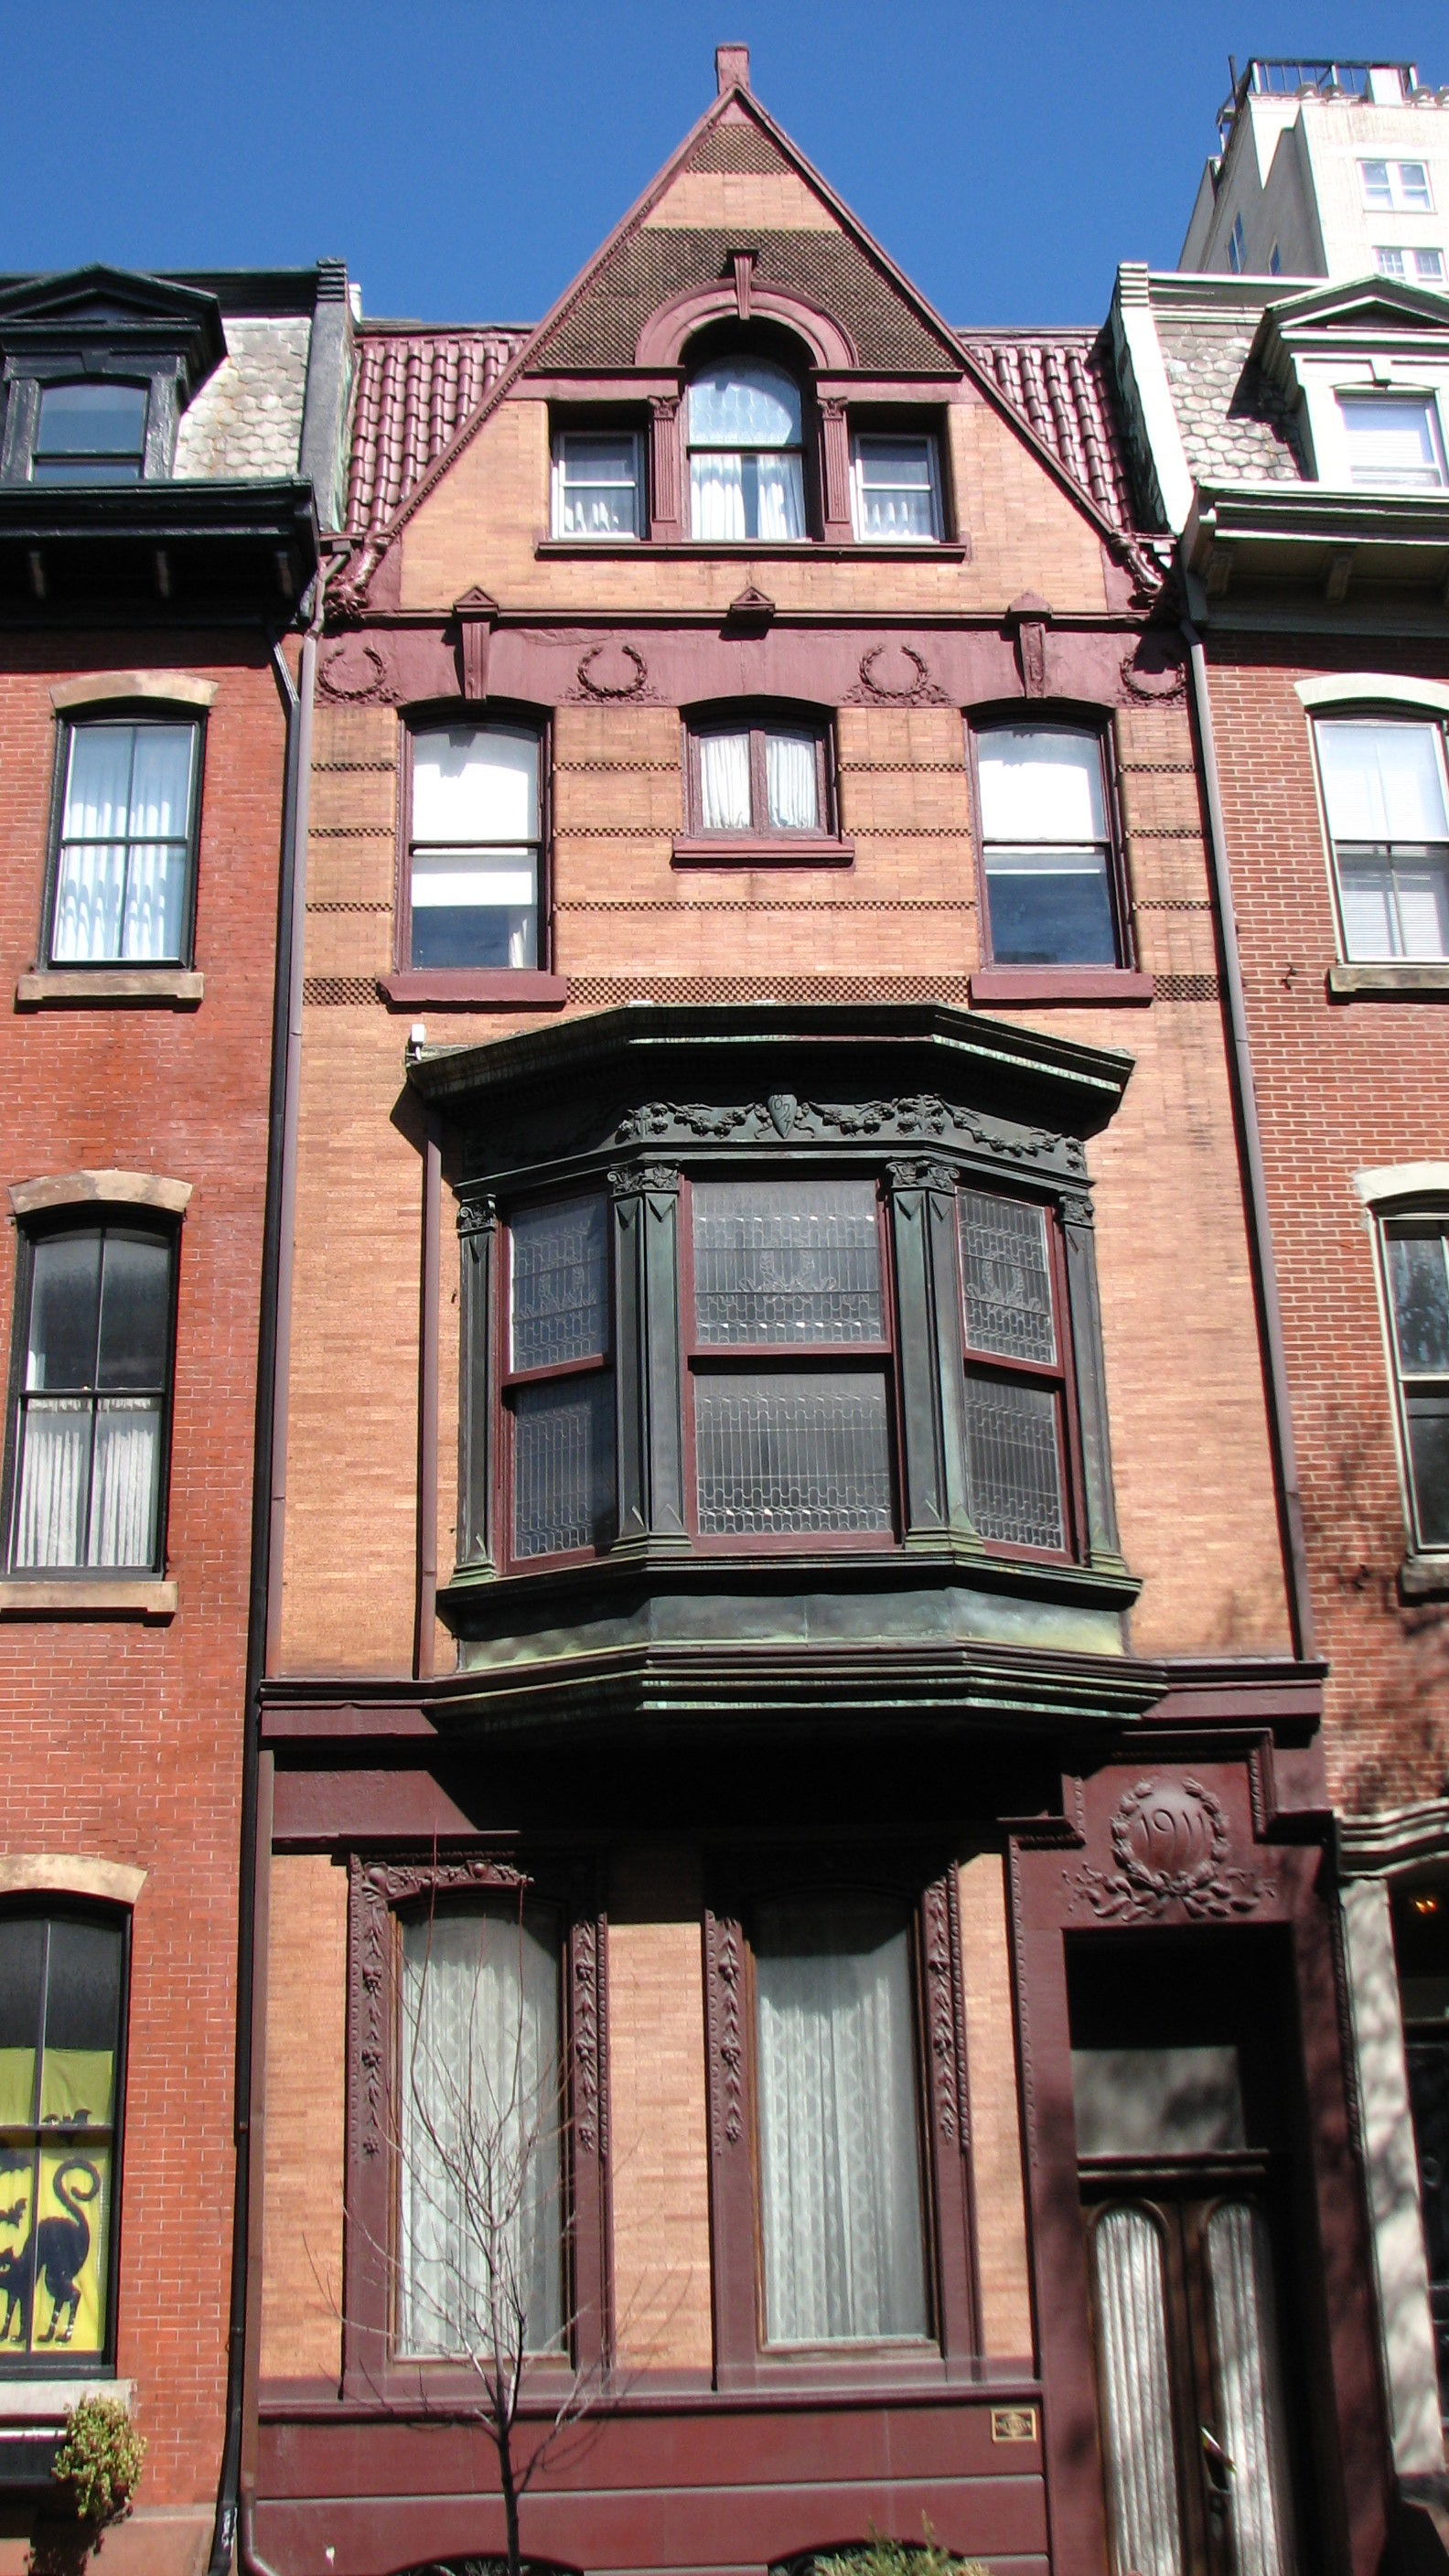 The house at 1911 Spruce combines many of the best features of the neighboring, late-19th century designs.